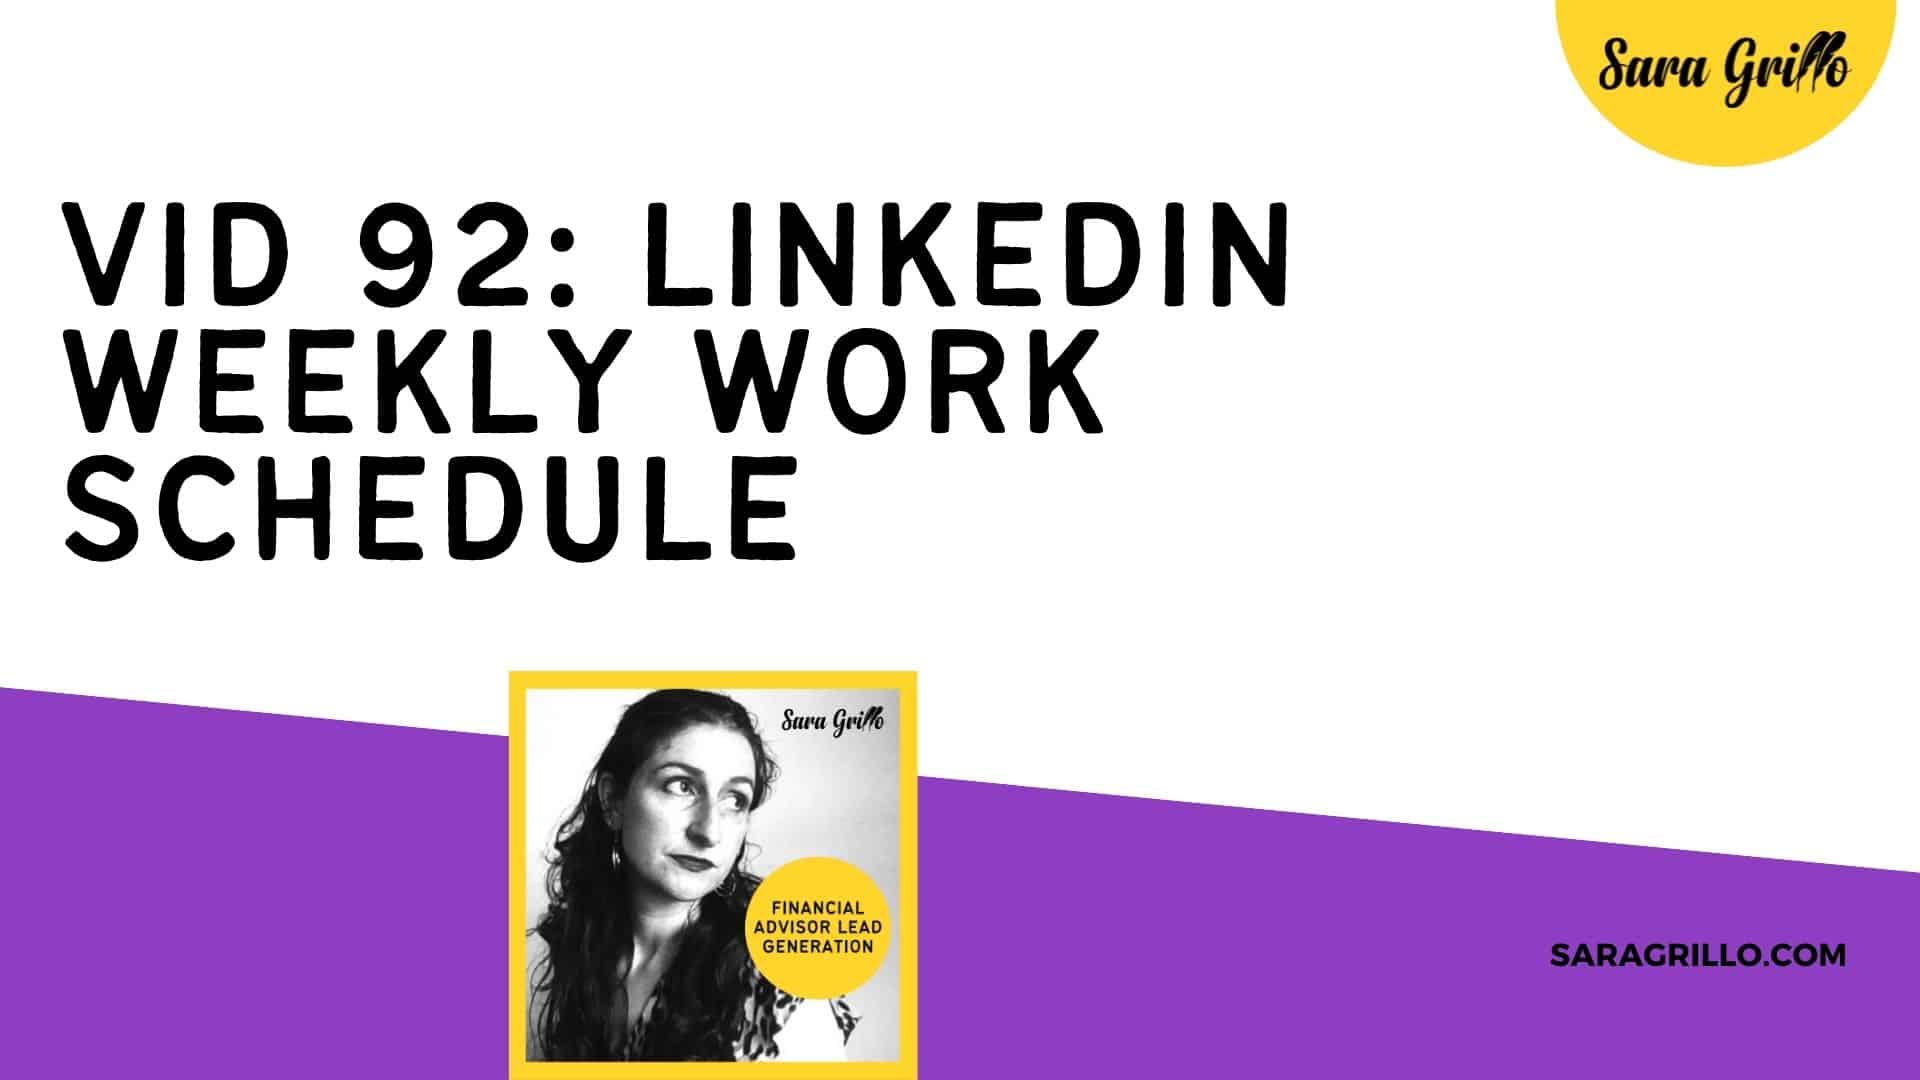 This blog talks about the LinkedIn weekly work schedule that financial advisors should follow if they want to succeed on social media.